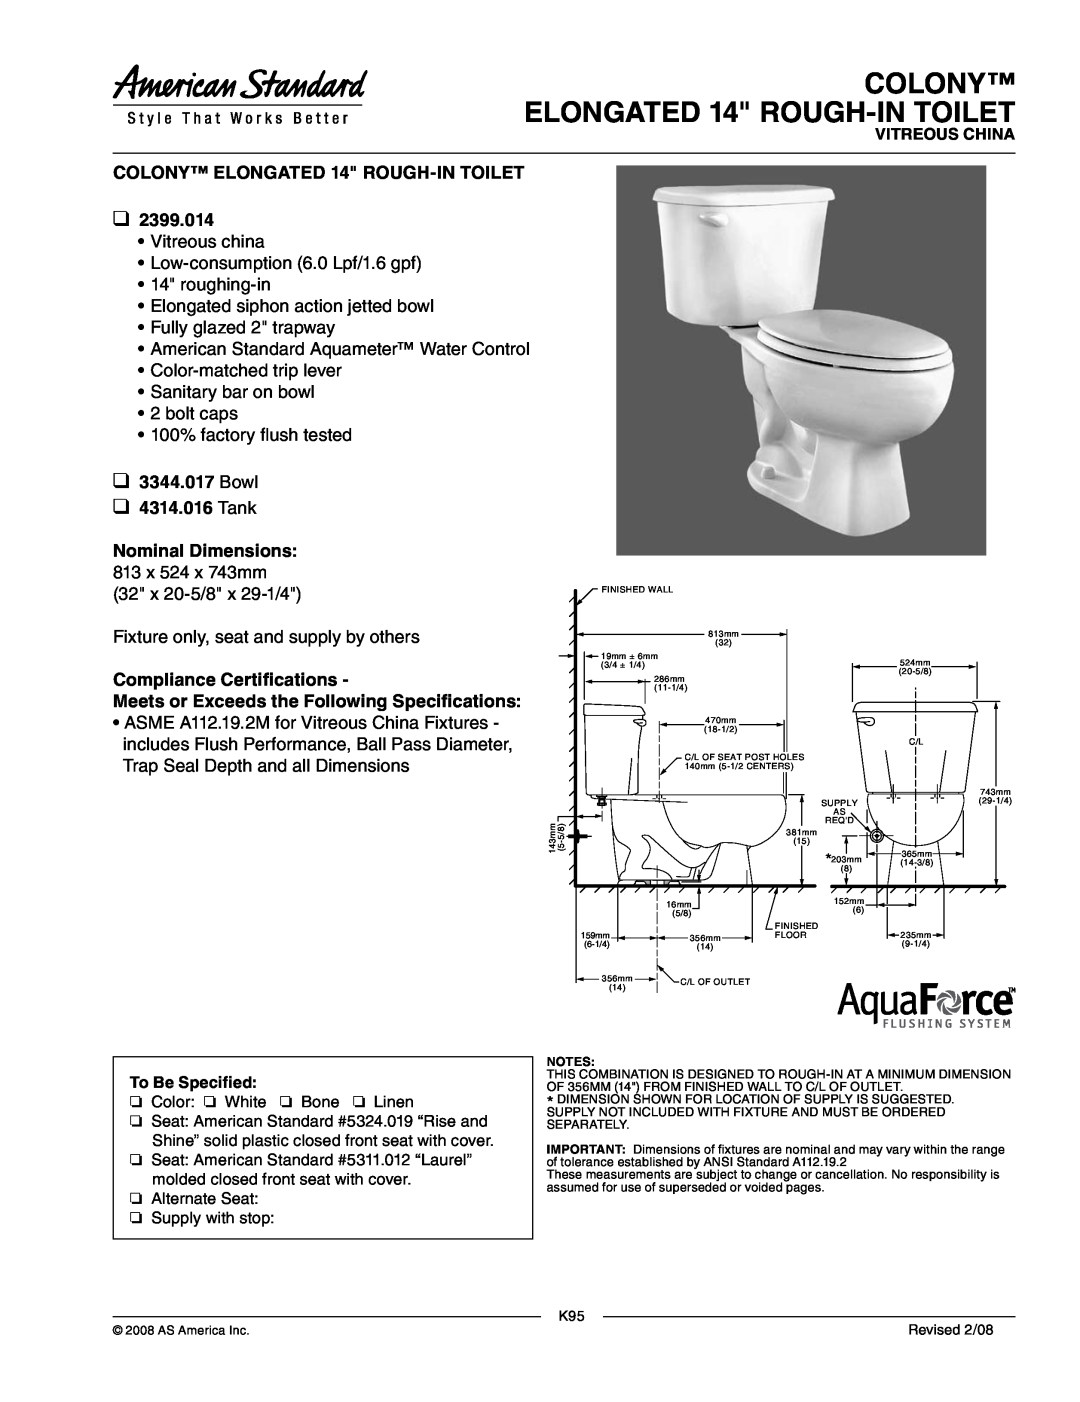 American Standard 2399.014, 3344.017 dimensions COLONY ELONGATED 14 ROUGH-INTOILET, Bowl 4314.016 Tank, Nominal Dimensions 